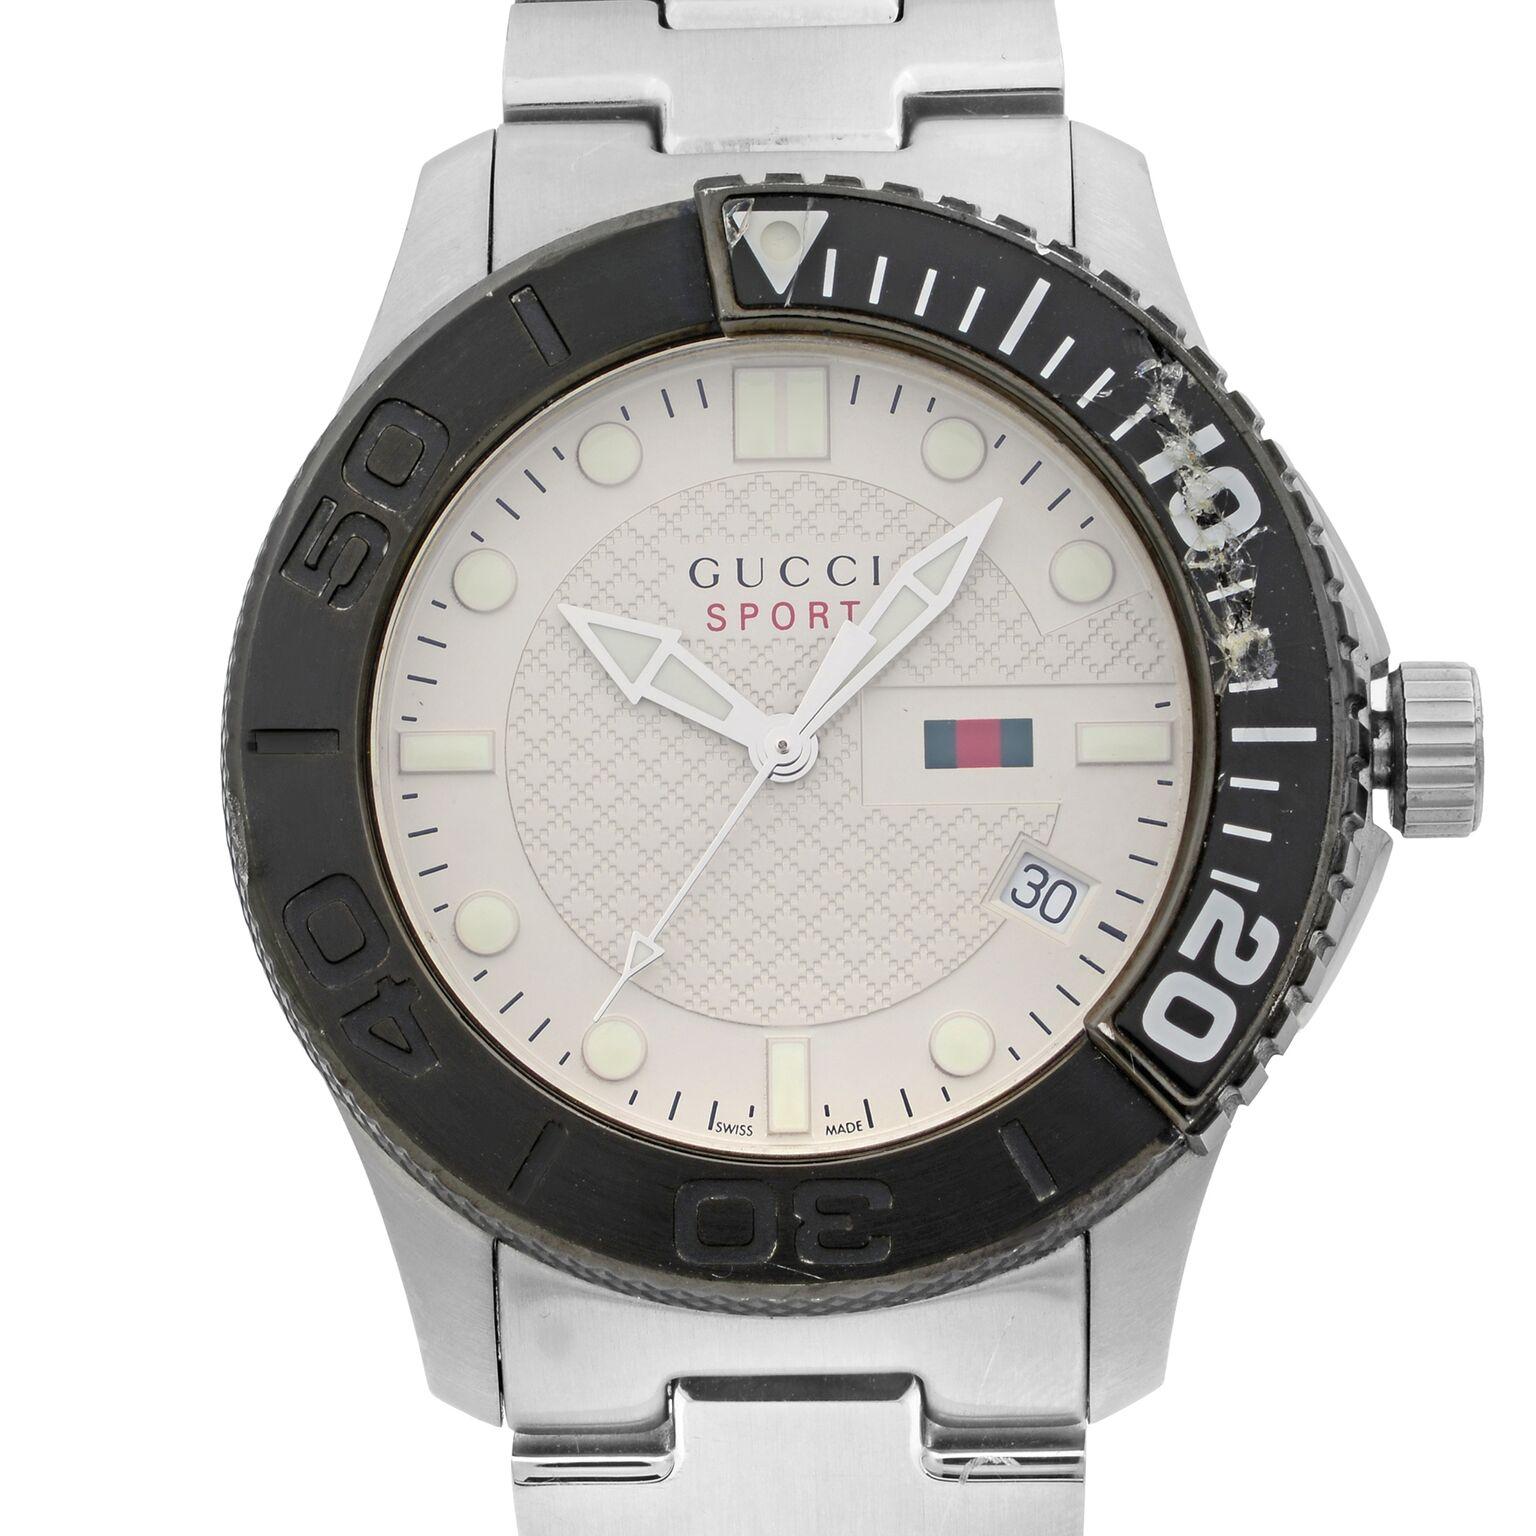 This pre-owned Gucci G-Timeless YA126250 is a beautiful men's timepiece that is powered by quartz (battery) movement which is cased in a stainless steel case. It has a round shape face, date indicator dial and has hand sticks & dots style markers.